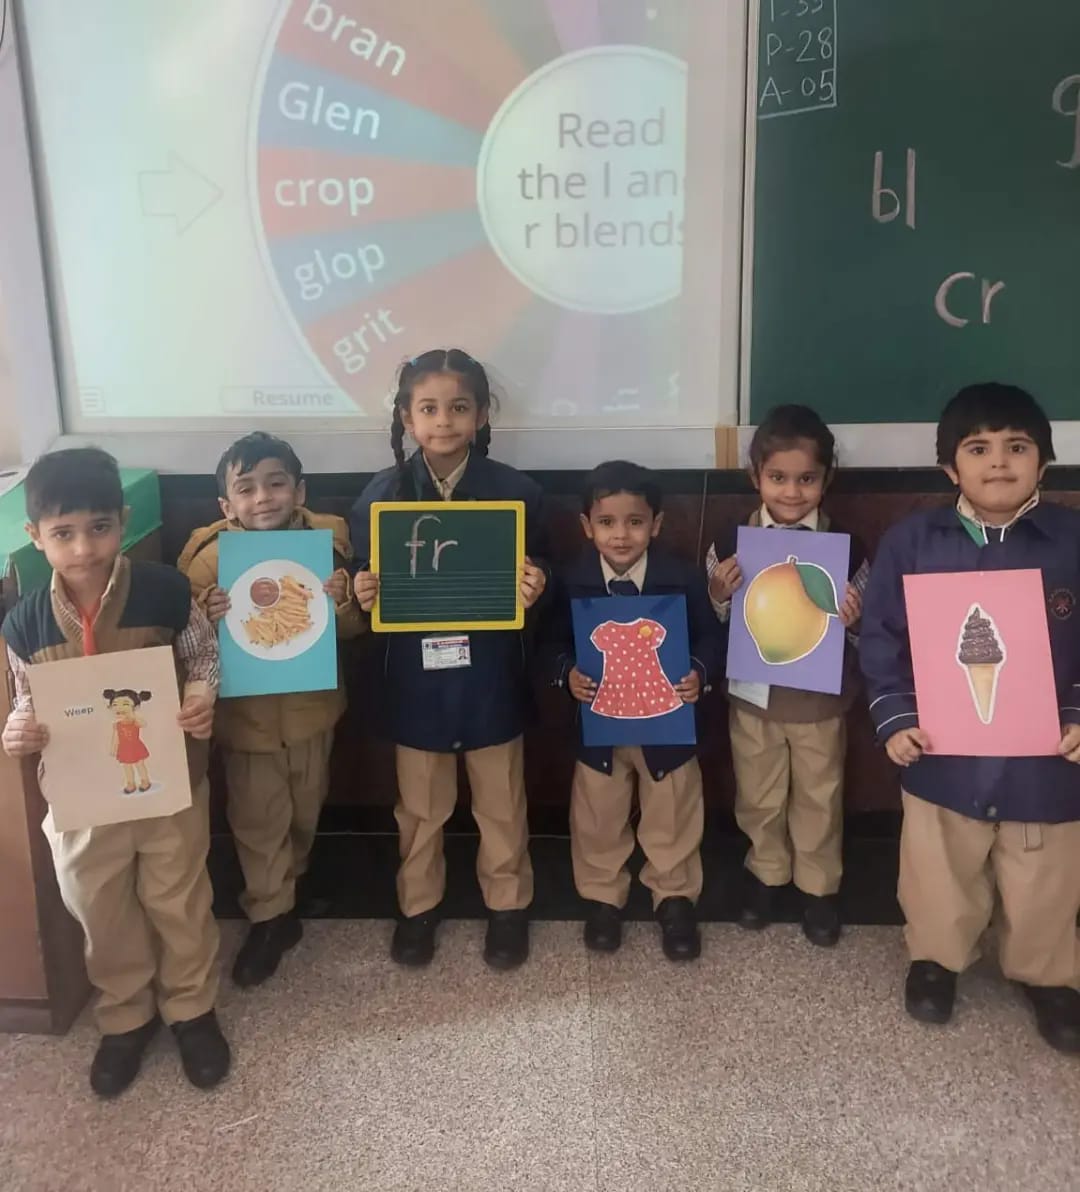 Bagless Day was organized for students of KG class-3